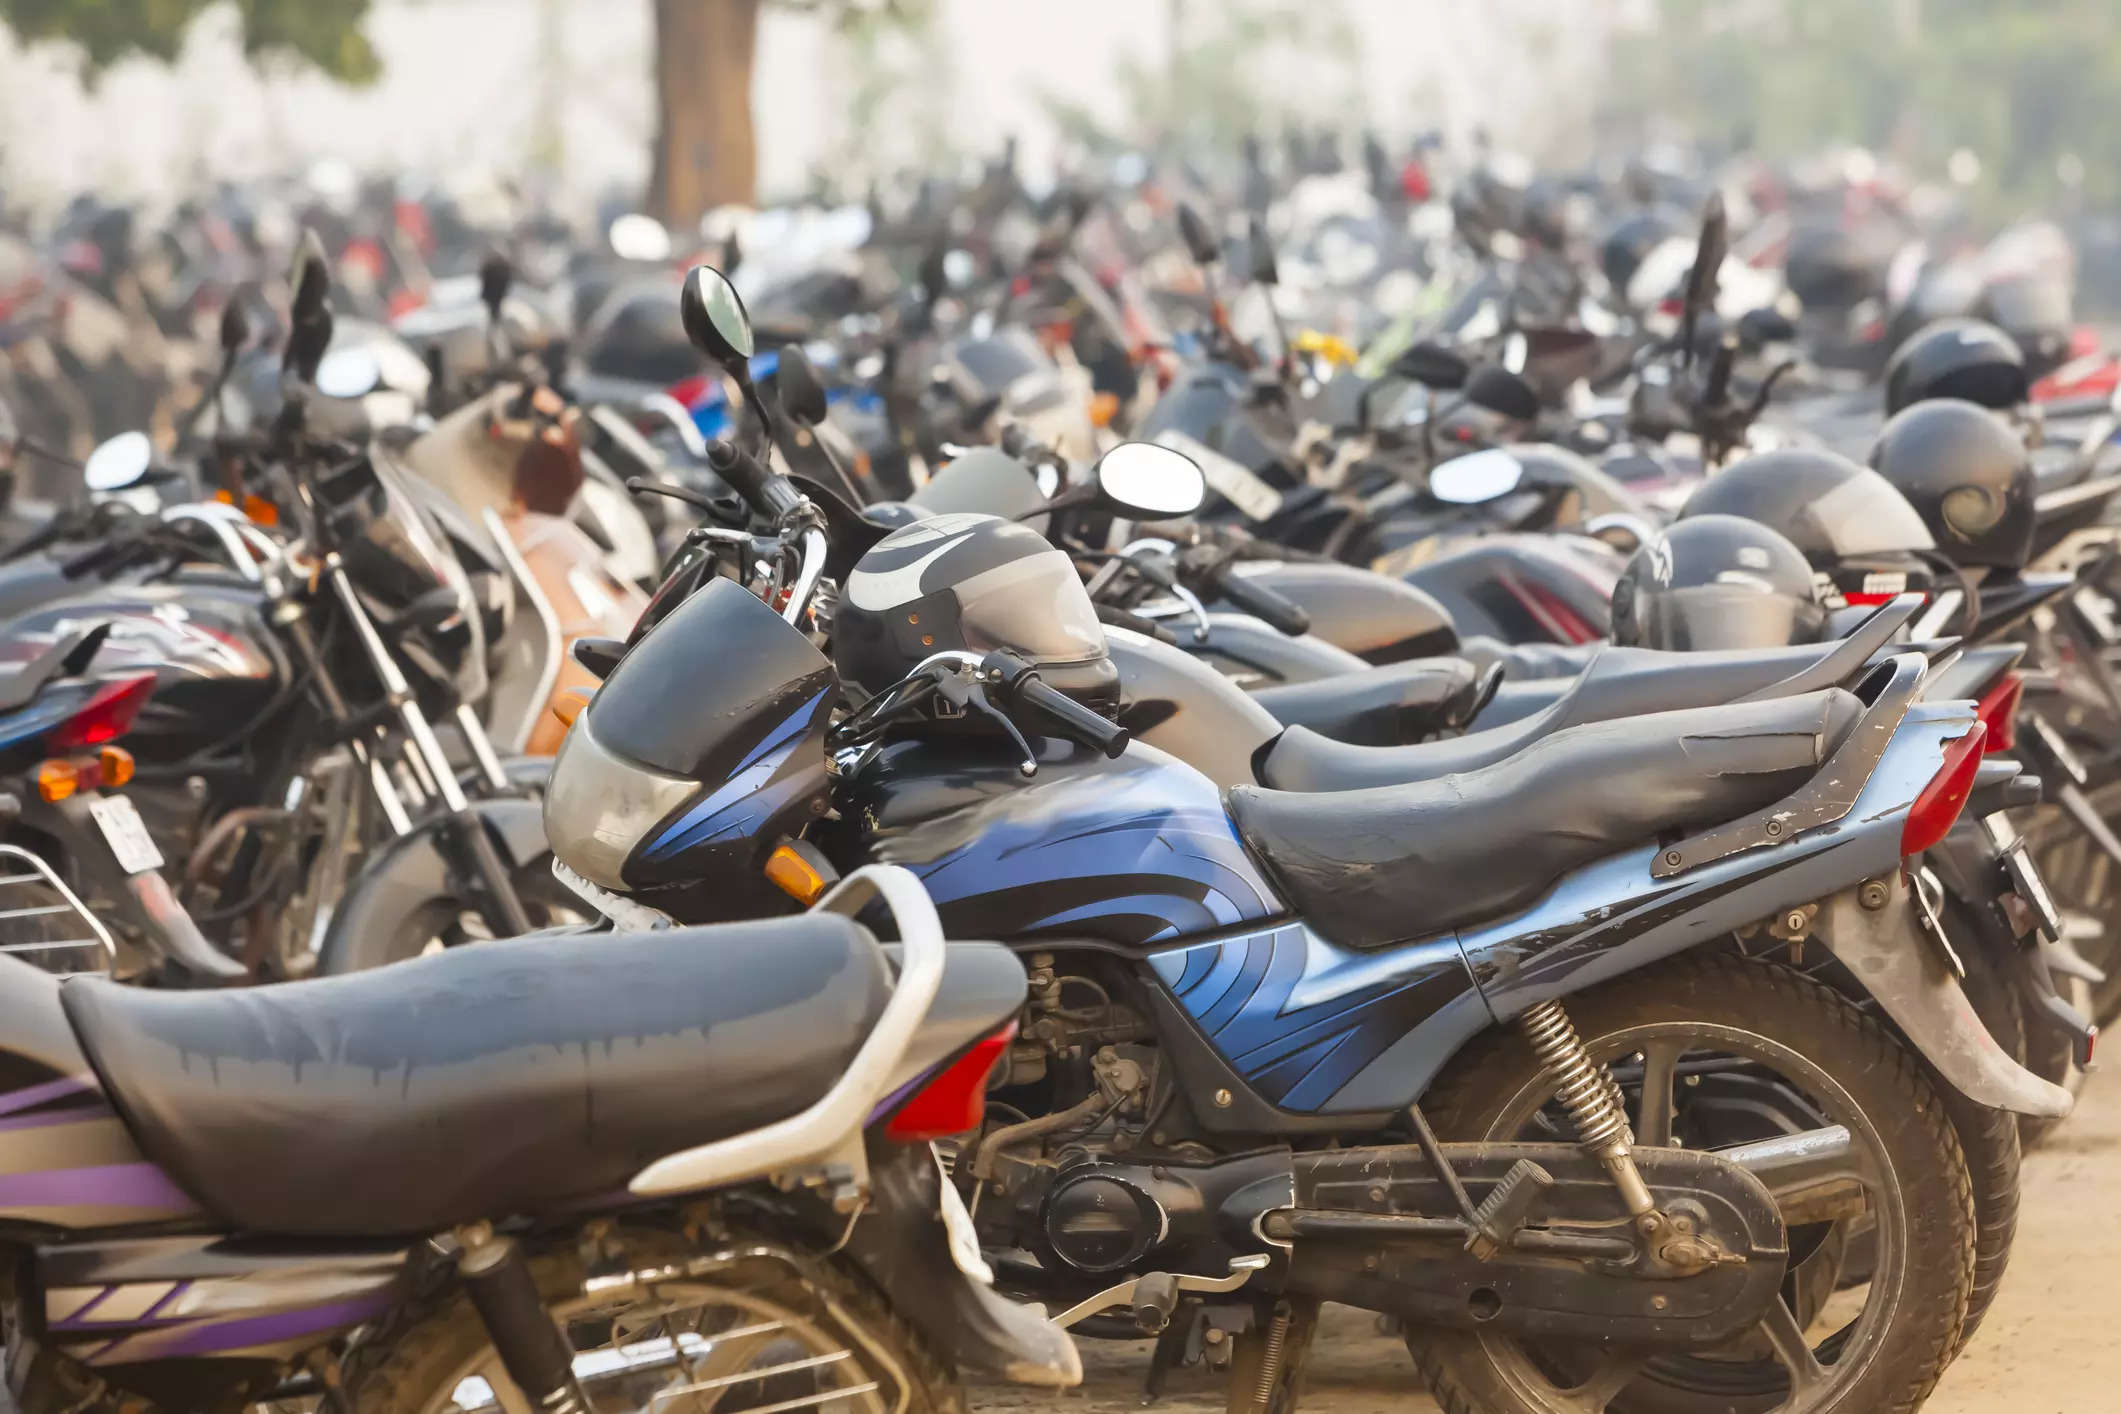  “They are selling at least 20% more than the normal two-wheelers,”